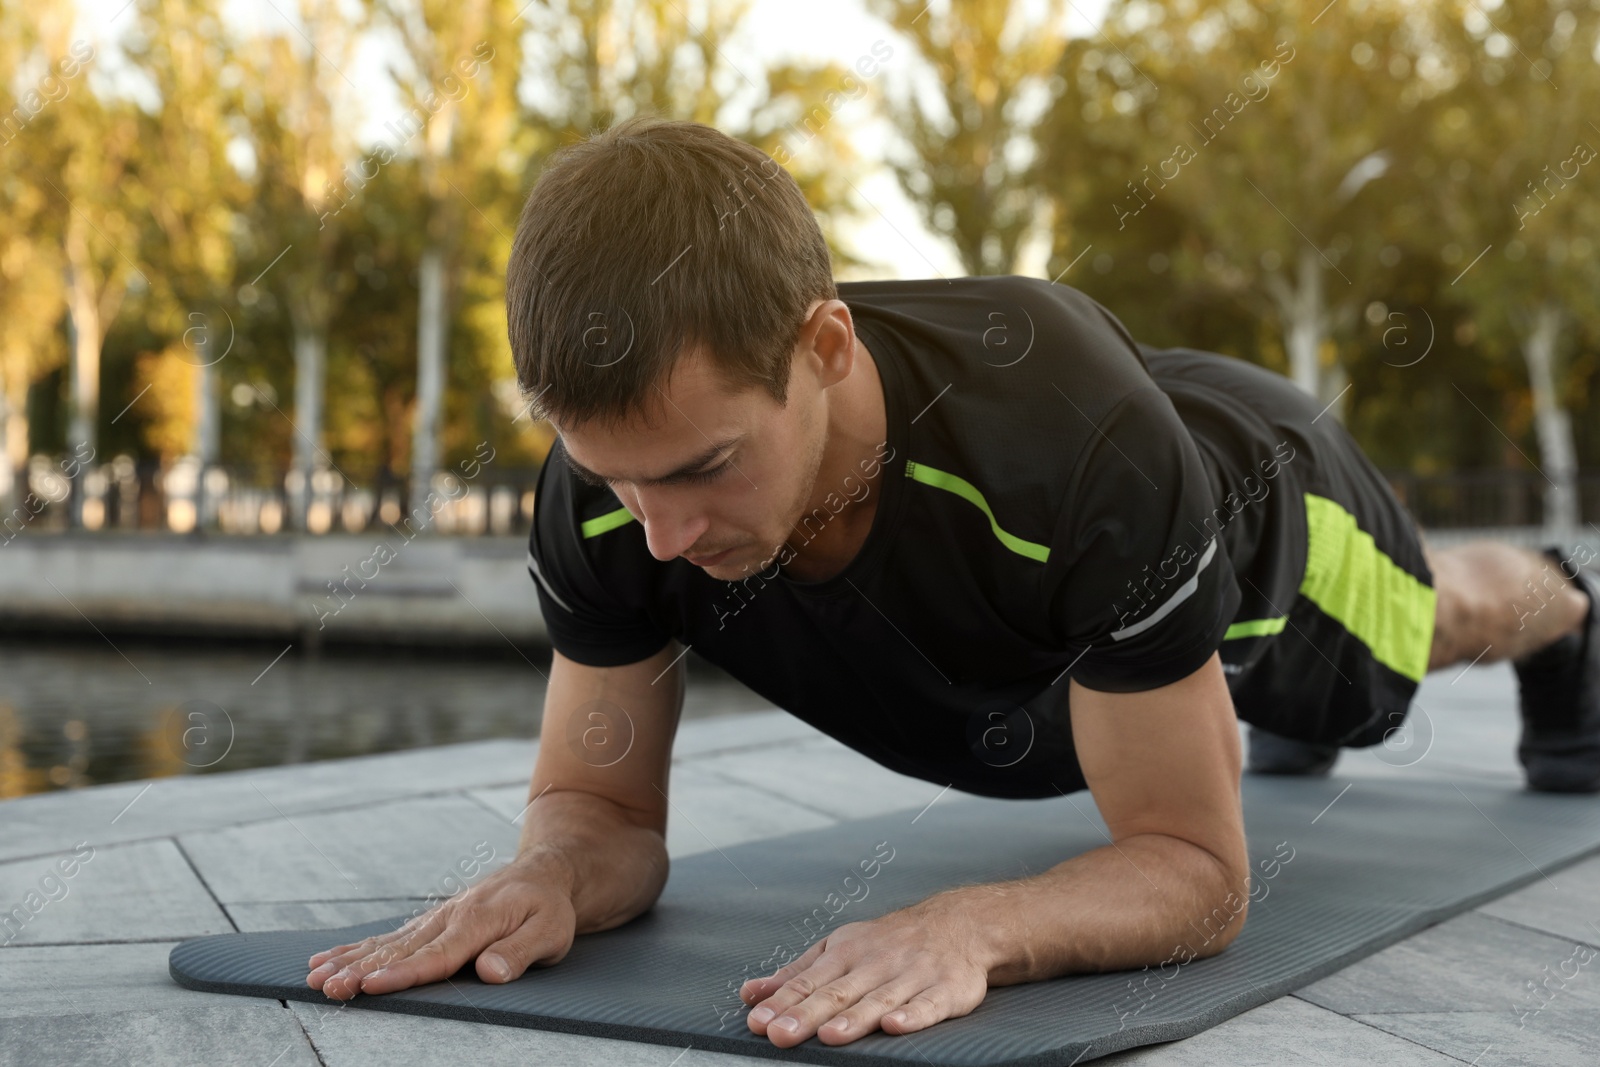 Photo of Sporty man doing plank exercise on mat near river